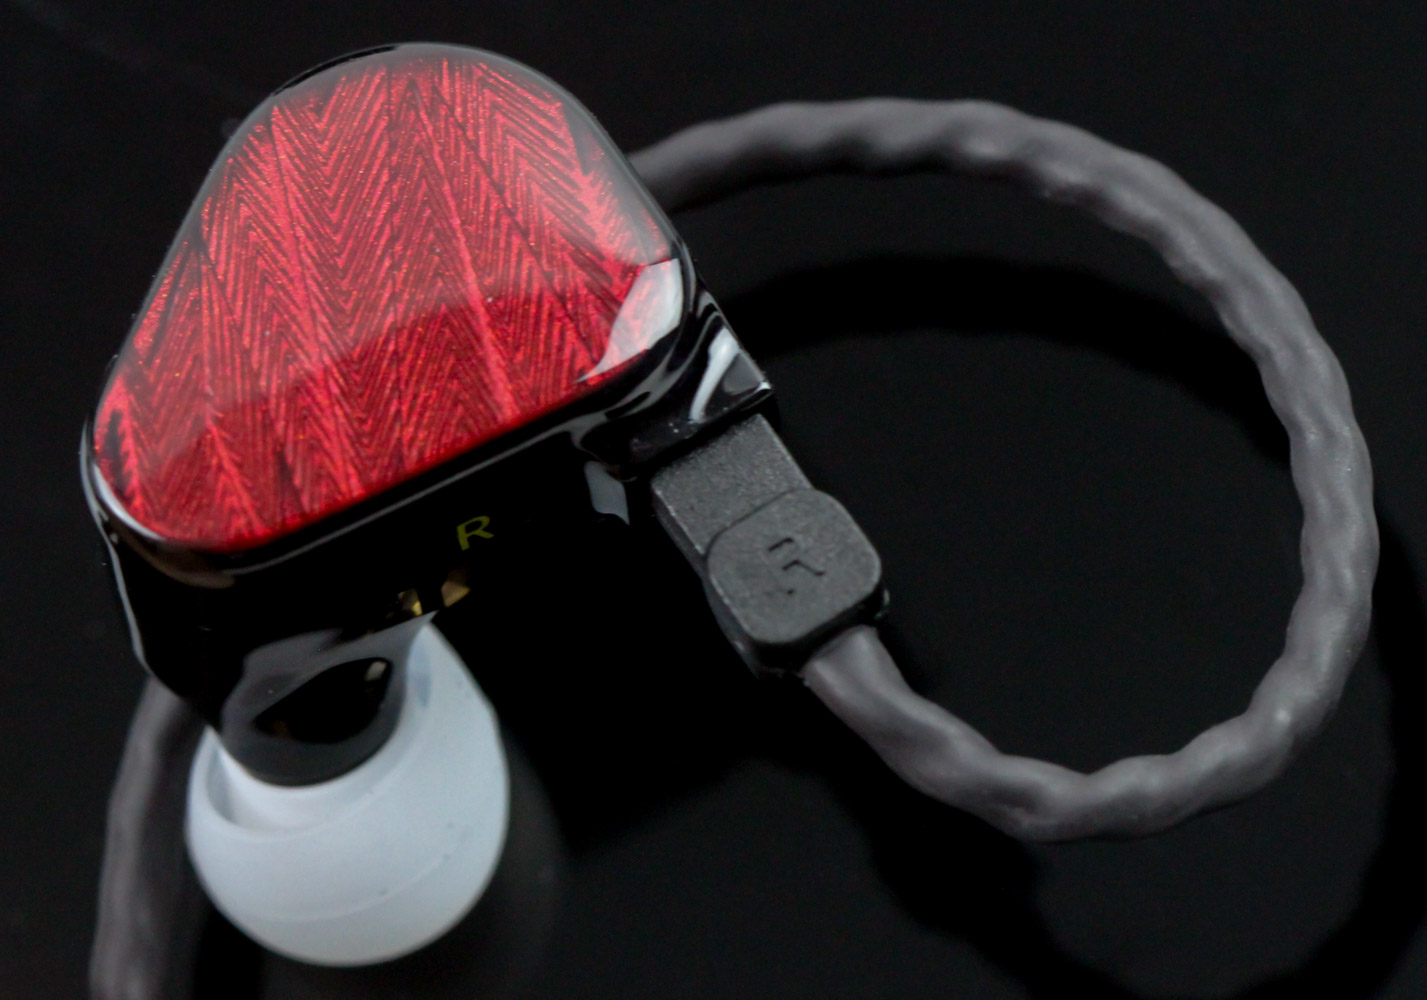 Truthear x Crinacle ZERO:RED In-Ear Monitors Review - Hype Machine